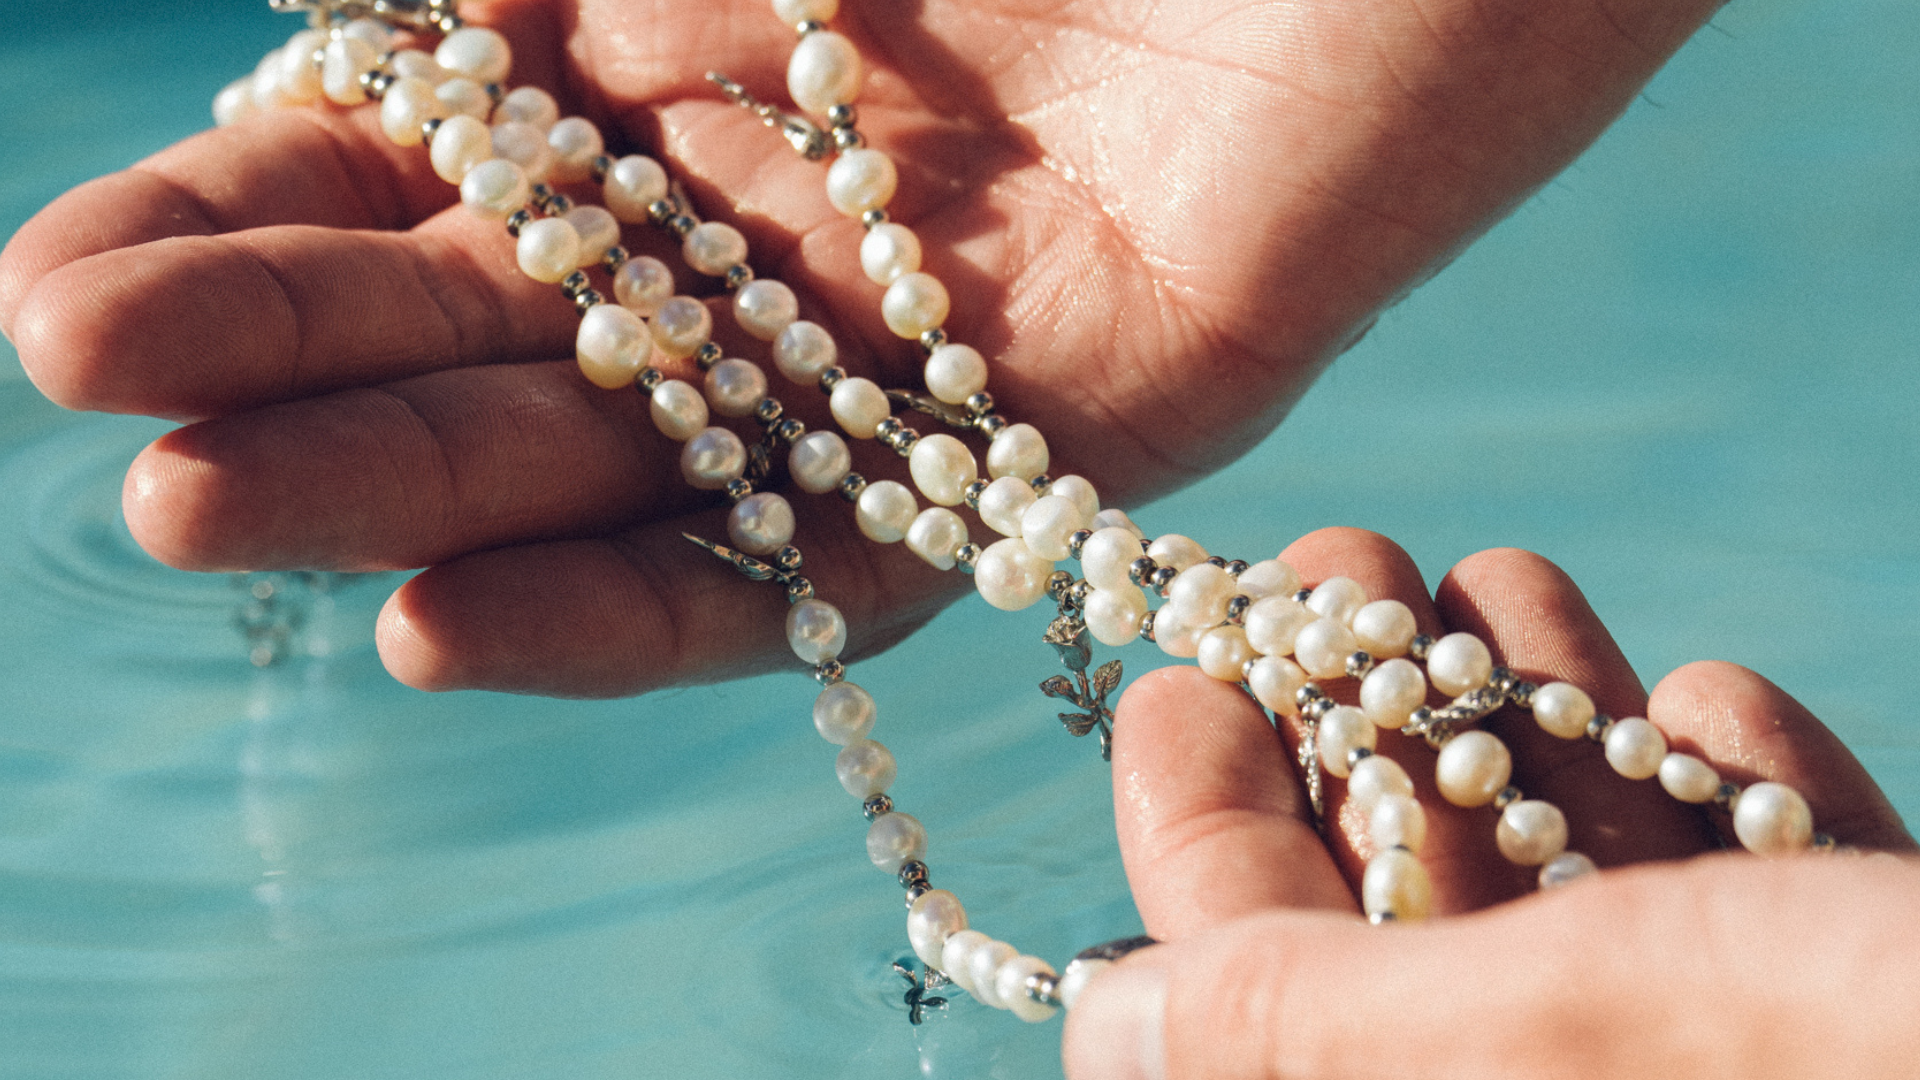 A new wave of pearls